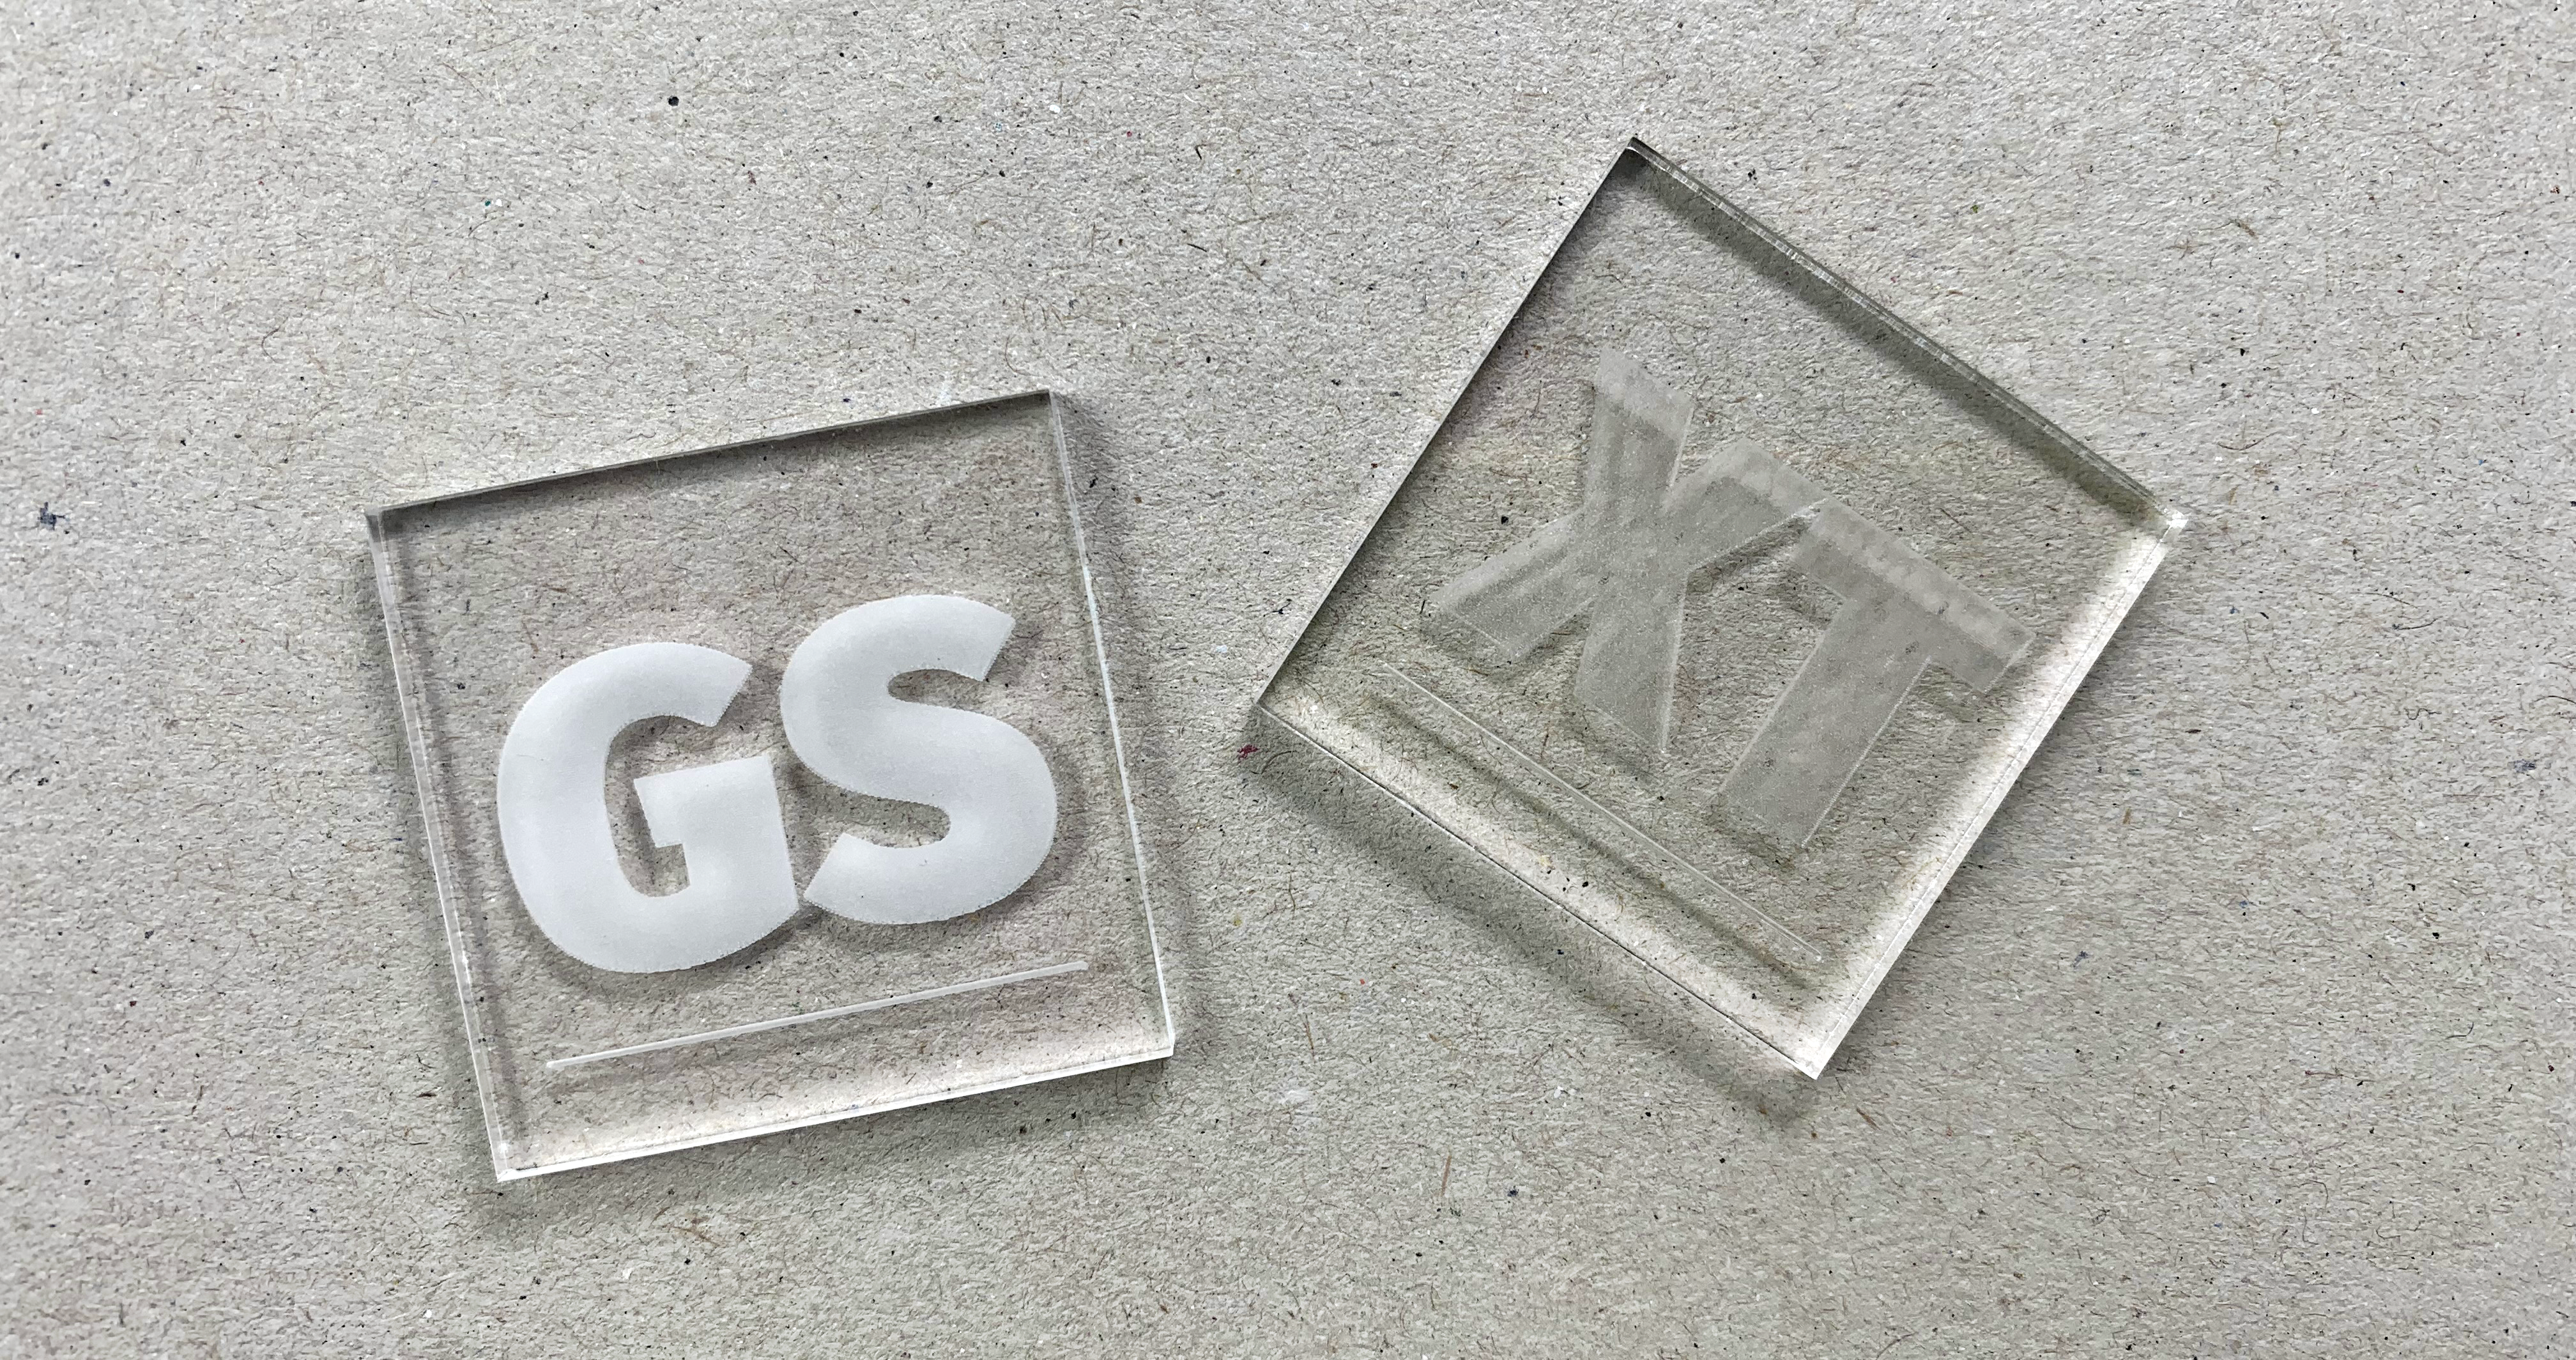 Two small laser-cut squares (approximately 2x2cm) of transparent acrylic. The left one is made of cast (GS) acrylic and the right one is made of extruded (XT) acrylic. The letters GS and XT are laser engraved on both. The GS engraving is matte white and high contrast, the XT engraving is less contrasty. This shows the difference in engraving quality between these two differently produced materials.